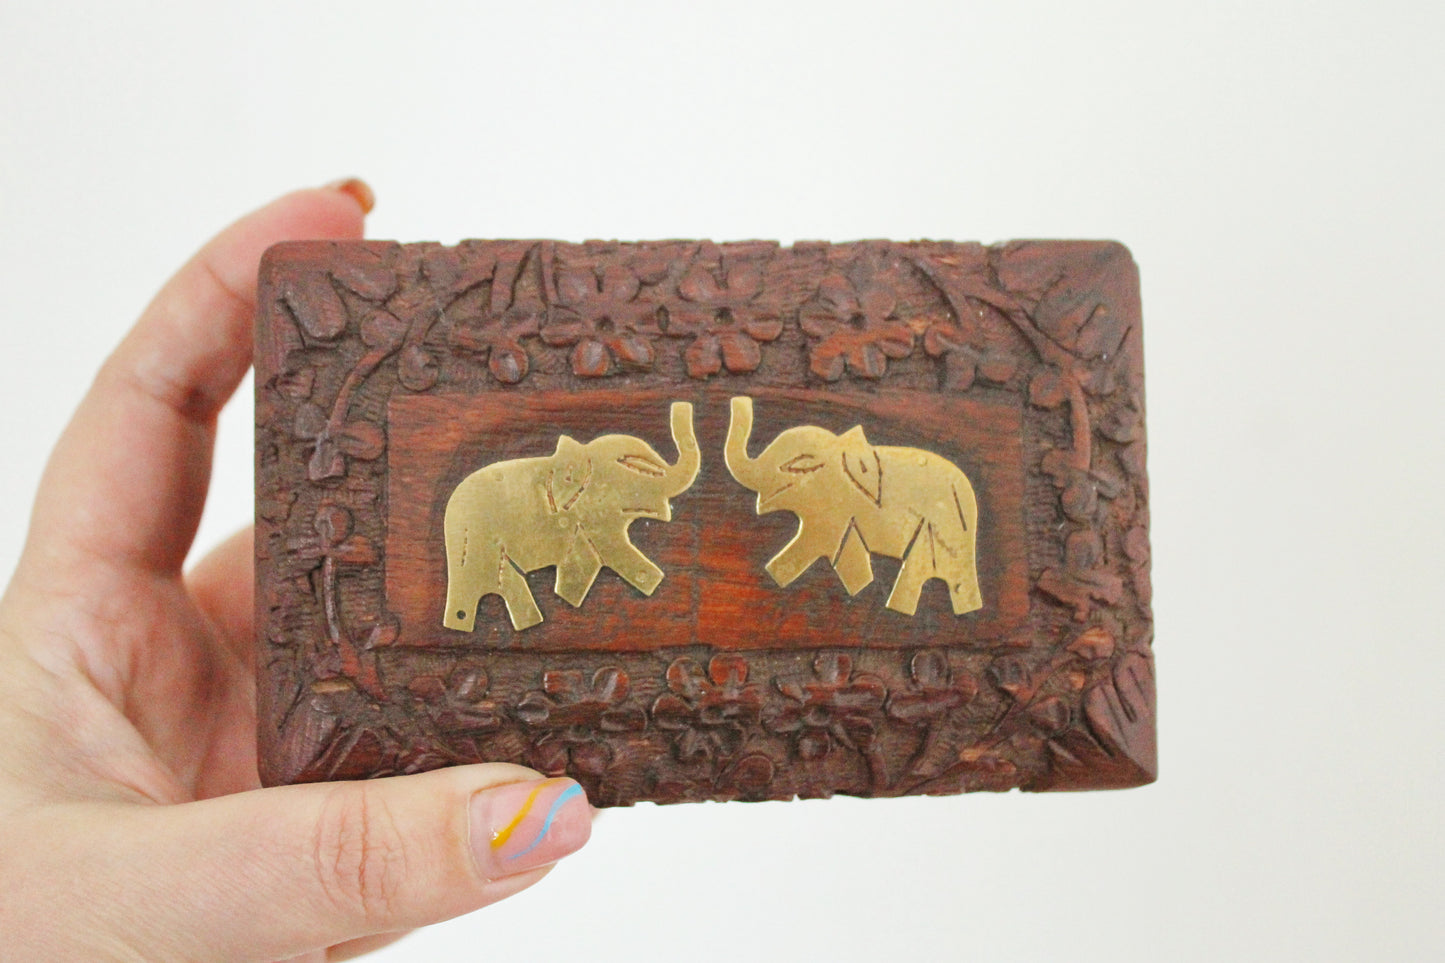 Vintage wooden carved box with brass elephants - Indian style vintage jewelry box - 1970s